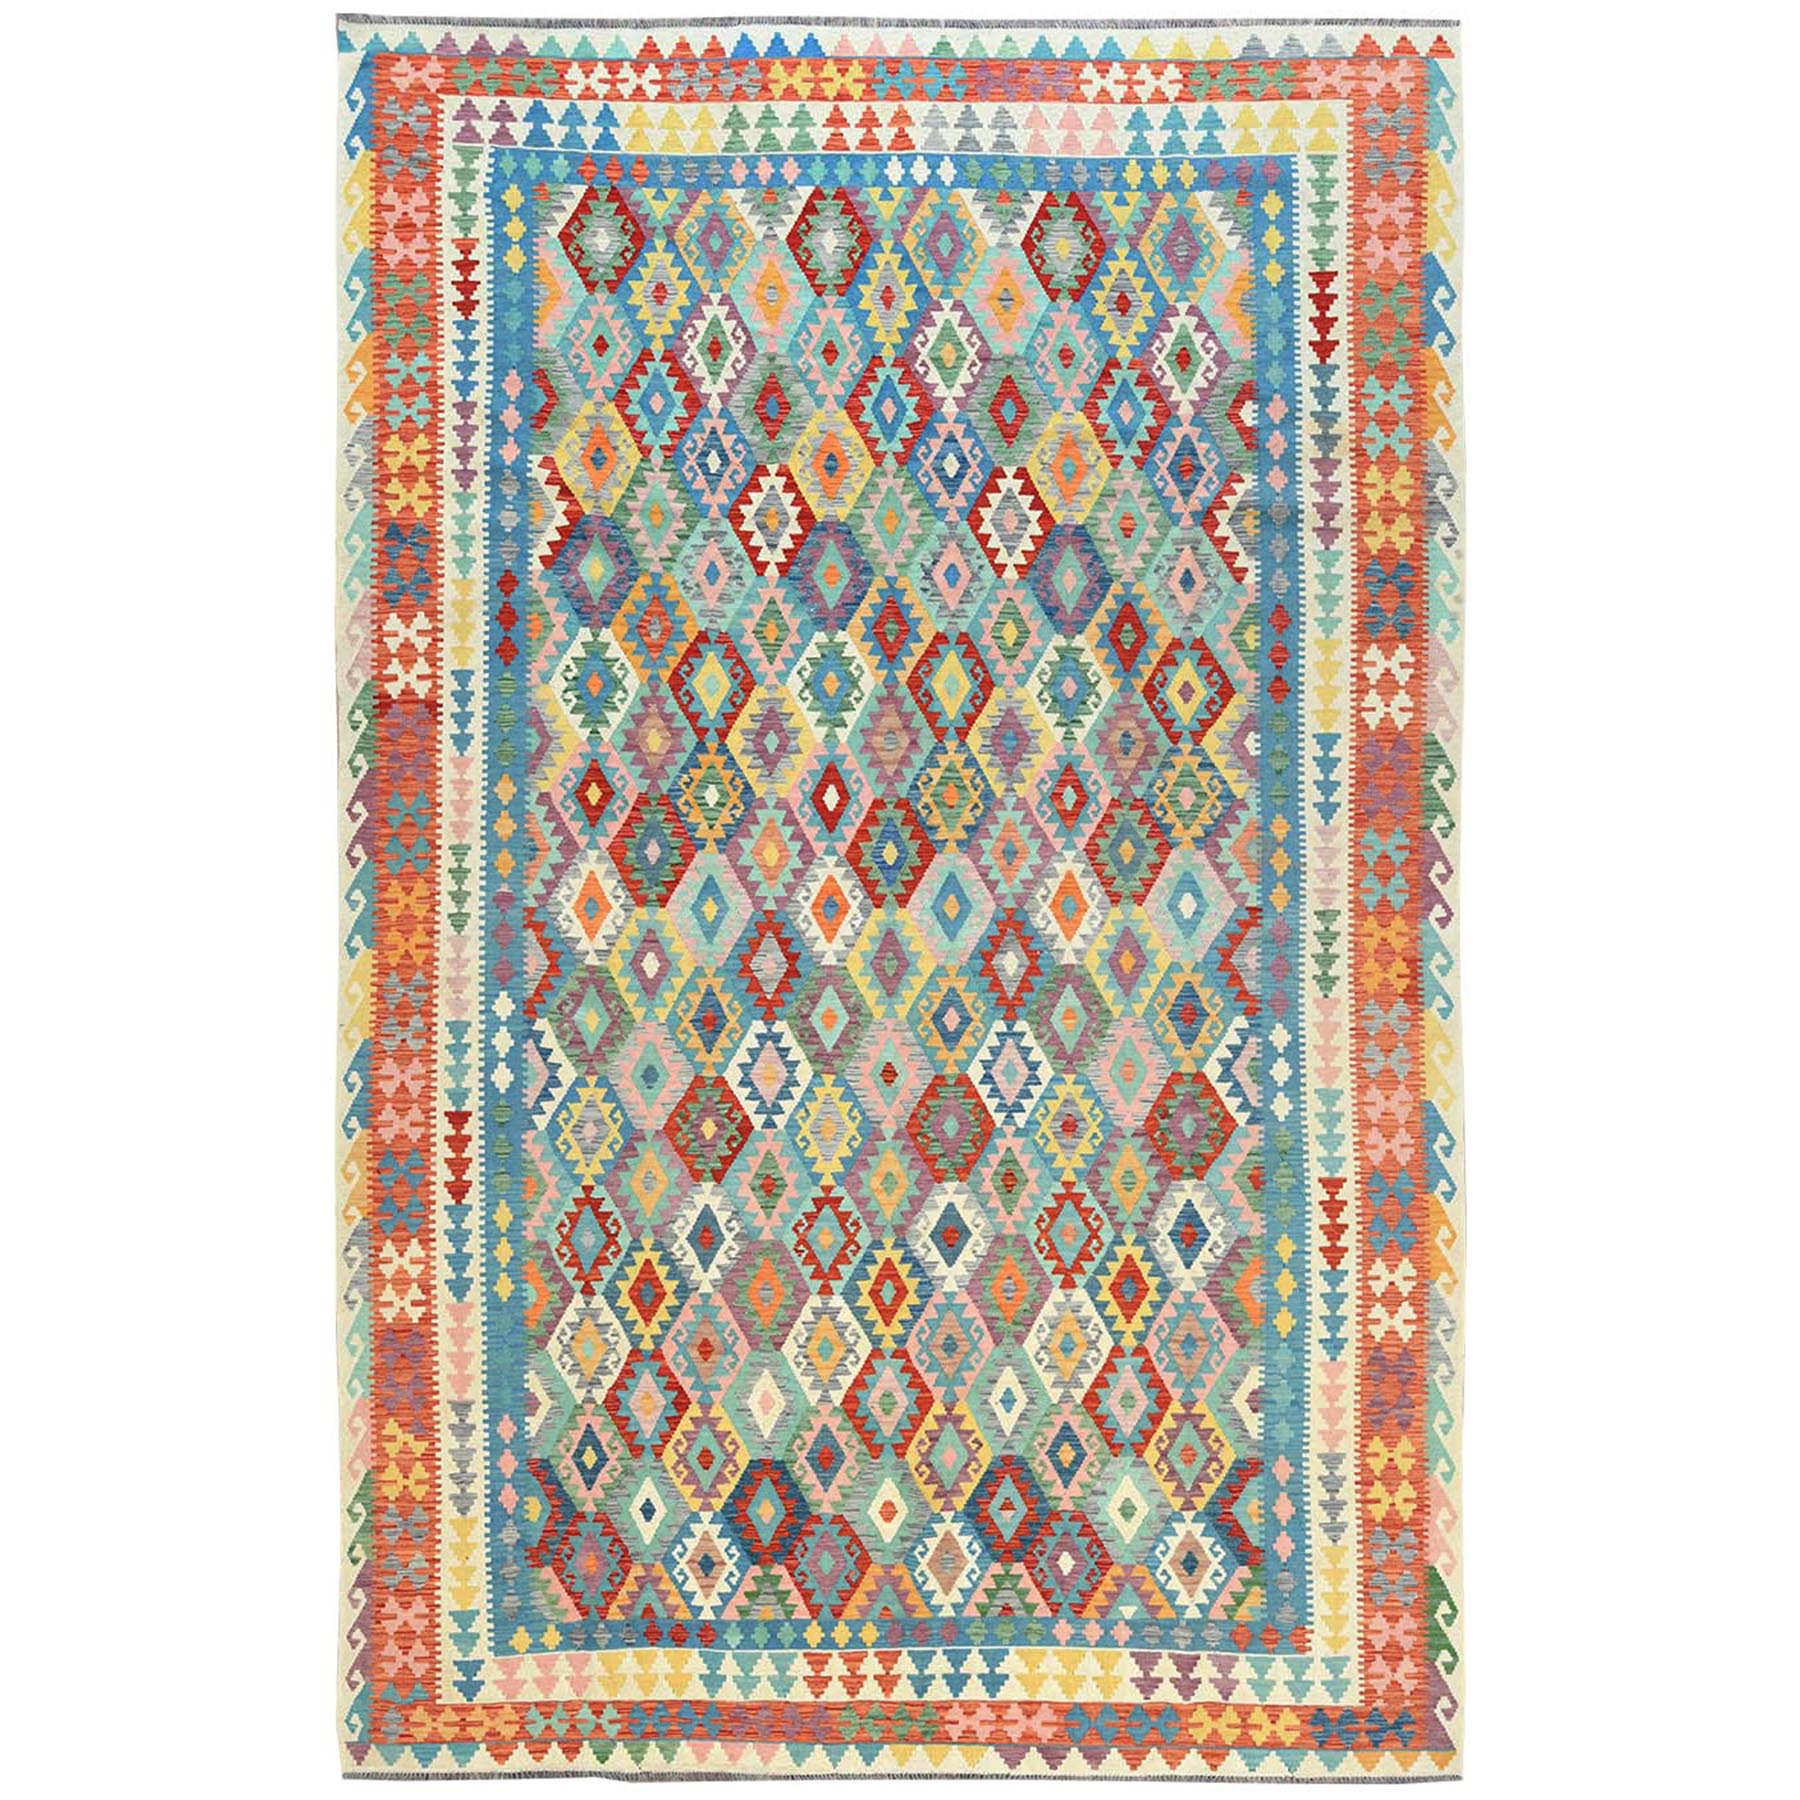 10'5"x16'4" Colorful, Pure Wool Hand Woven, Afghan Kilim with Geometric Design Flat Weave Veggie Dyes, Reversible Oversized Oriental Rug 